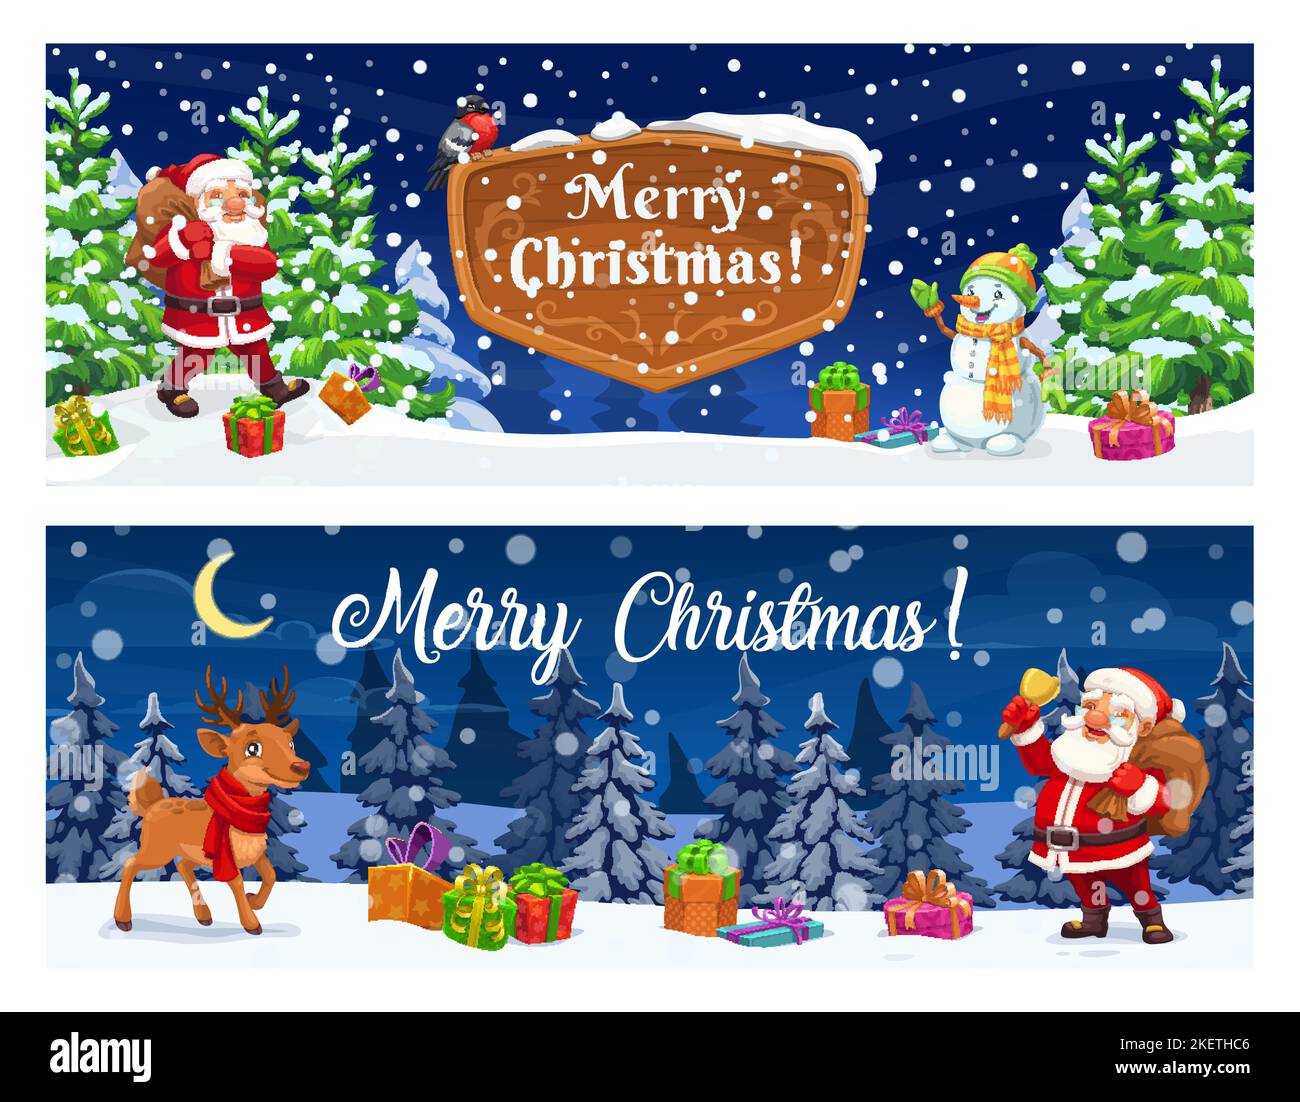 Christmas banners cartoon santa and deer in snowy holiday forest. Vector horizontal cards with funny father Noel, reindeer and snowman in night wood with spruces and snowfall. Greeting cards for xmas Stock Vector